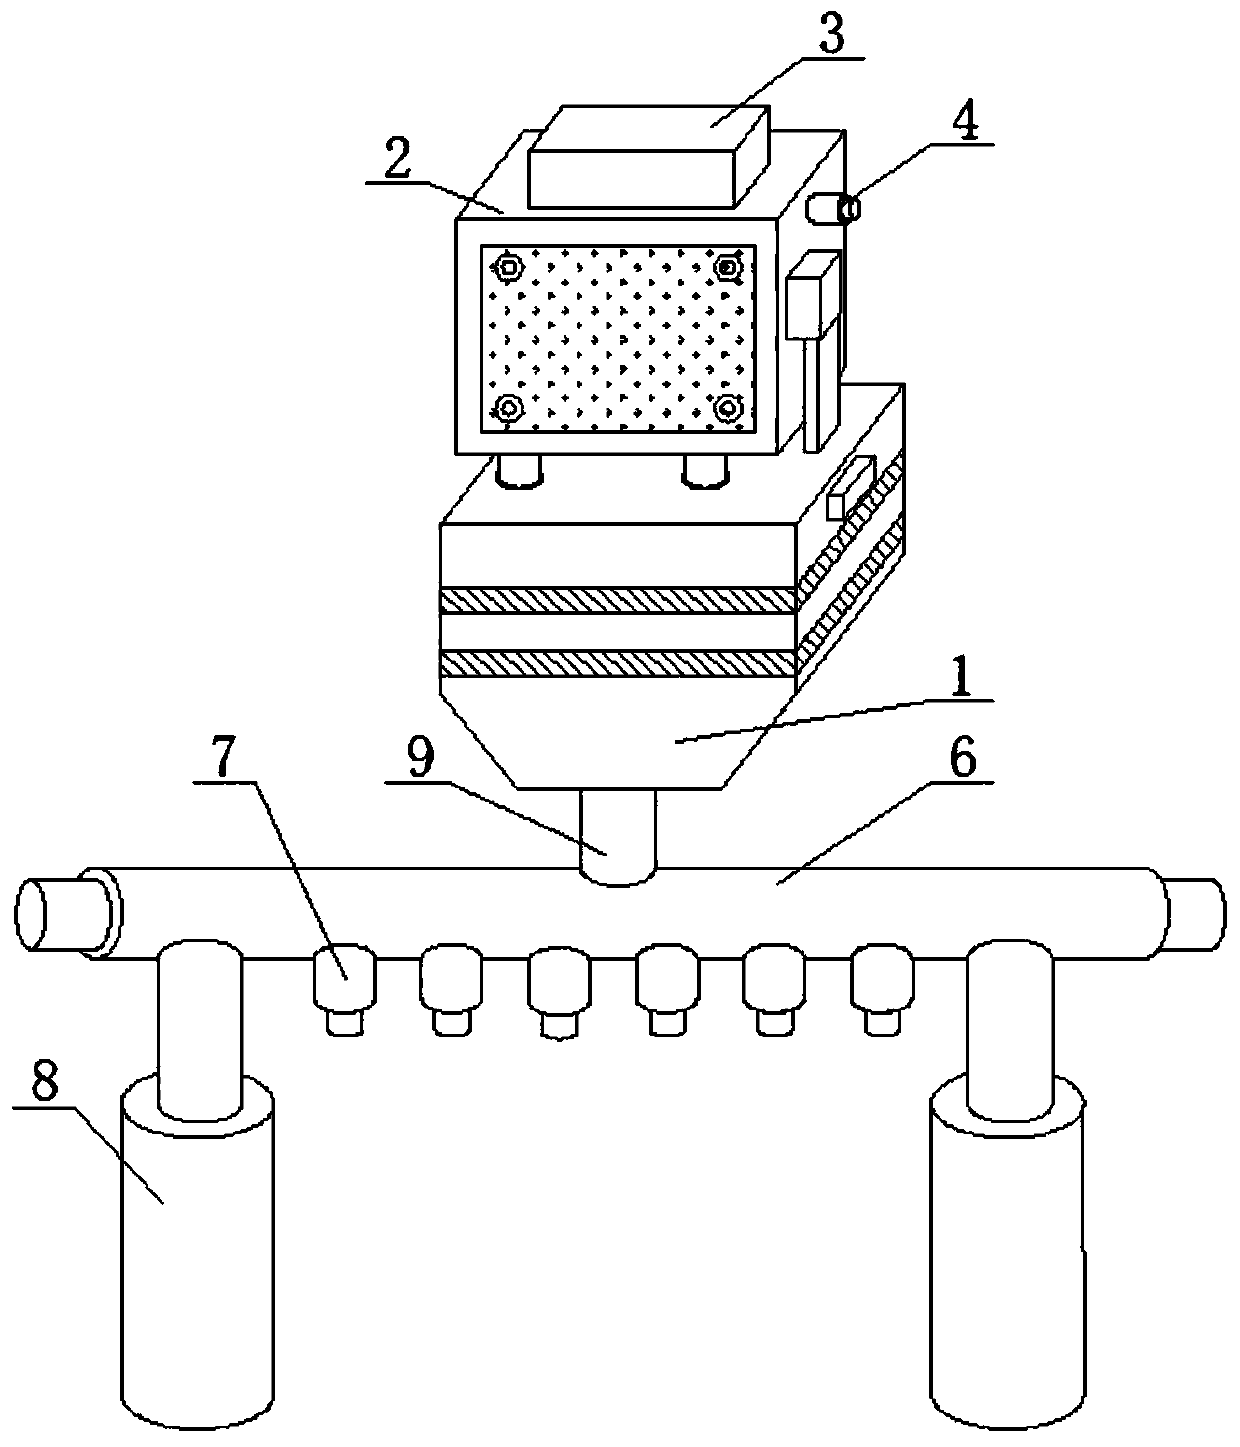 Chemical-adding drip irrigation device for agriculture